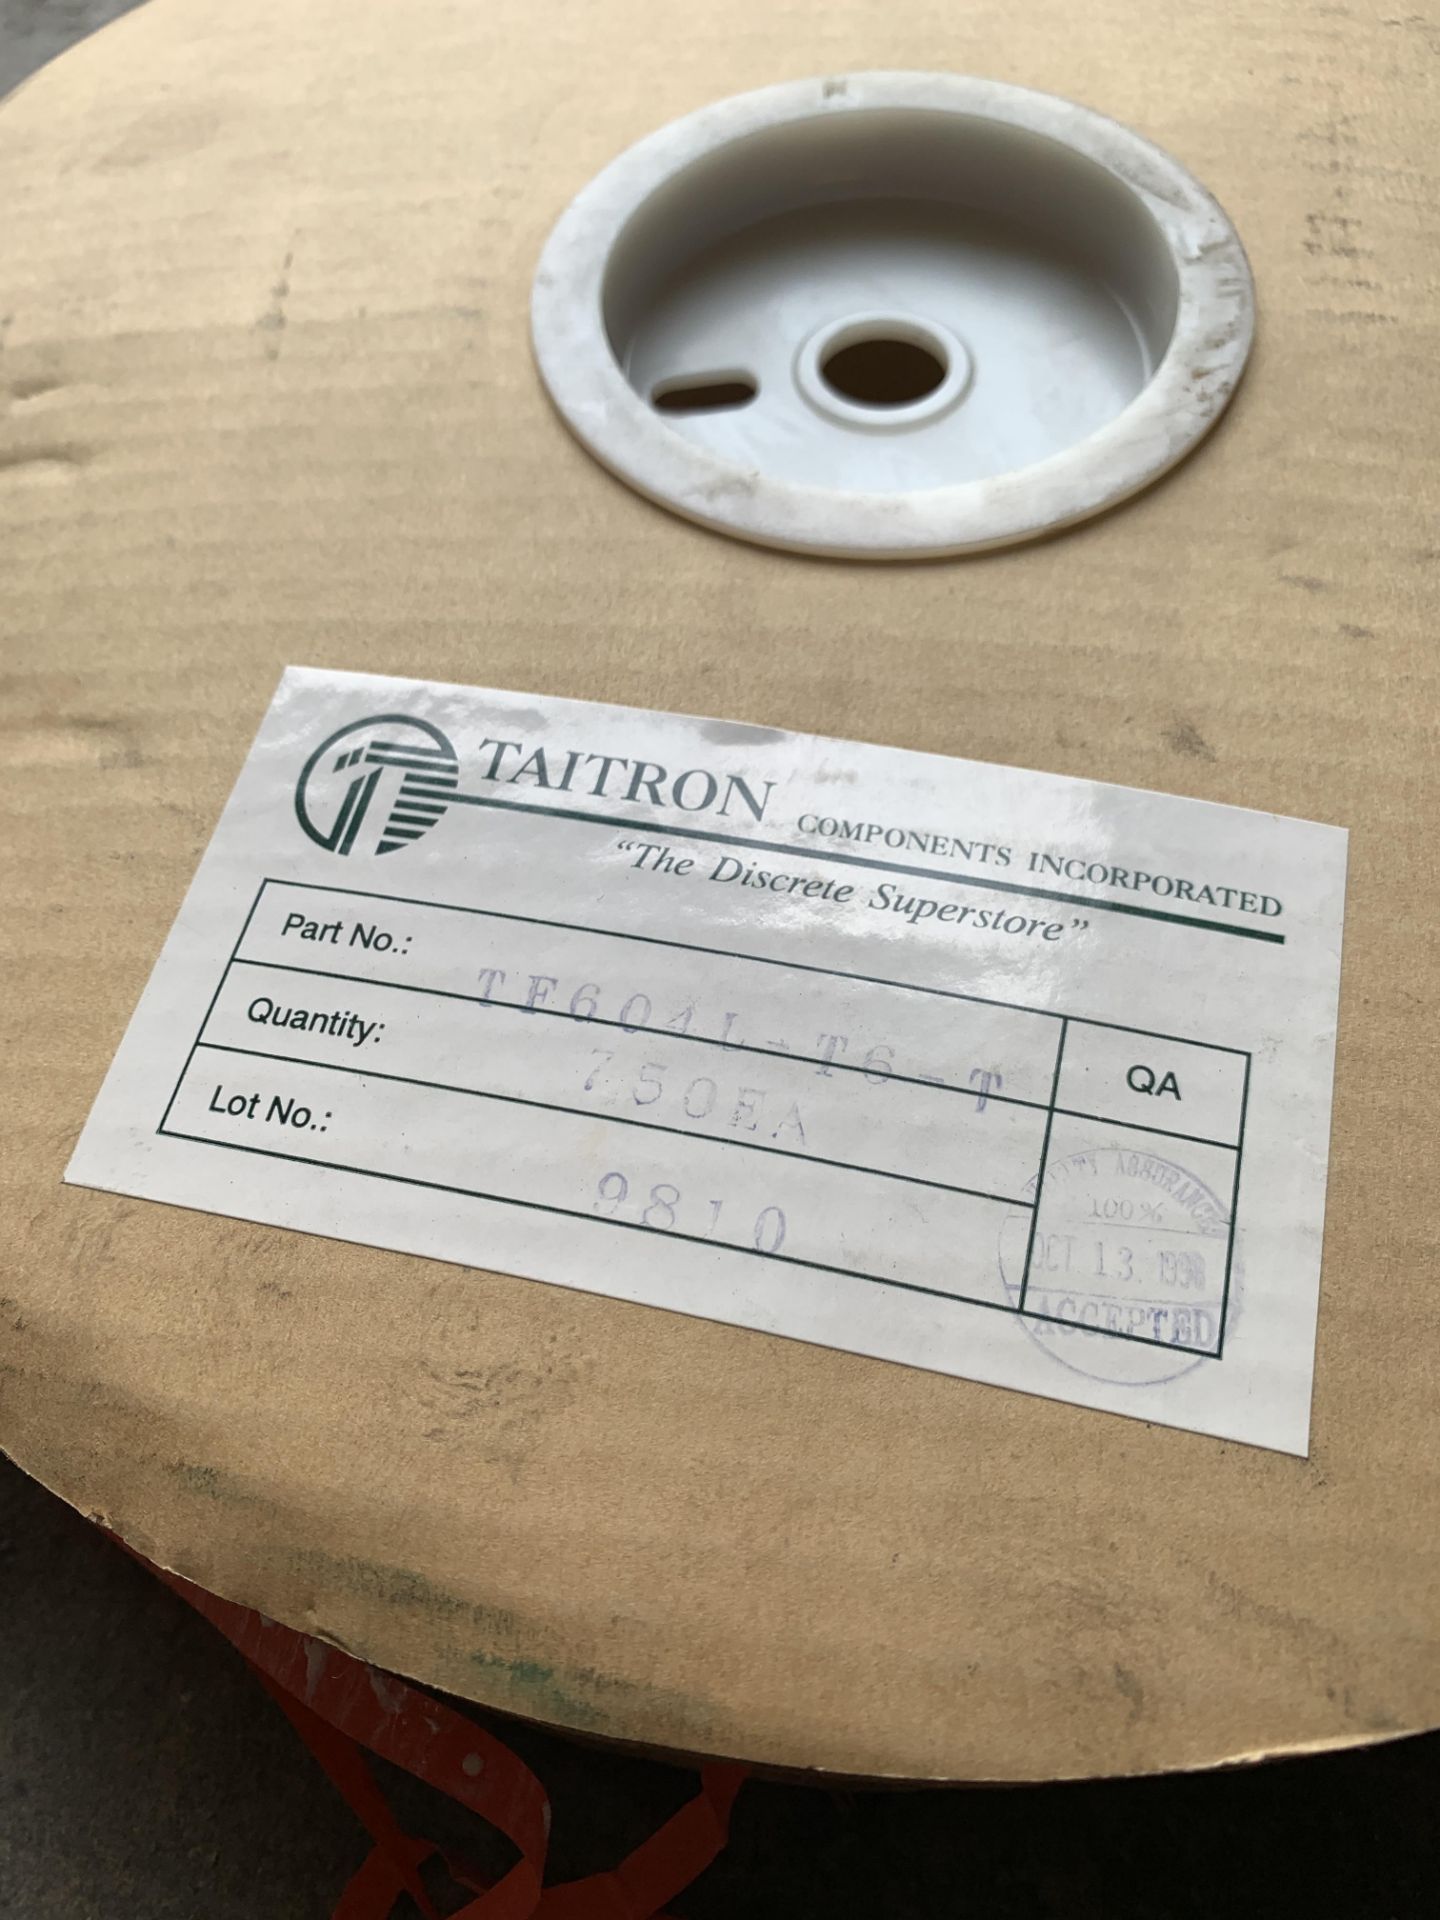 6 Large Rolls of Components for Boards - Taitron and FCI - Image 7 of 12